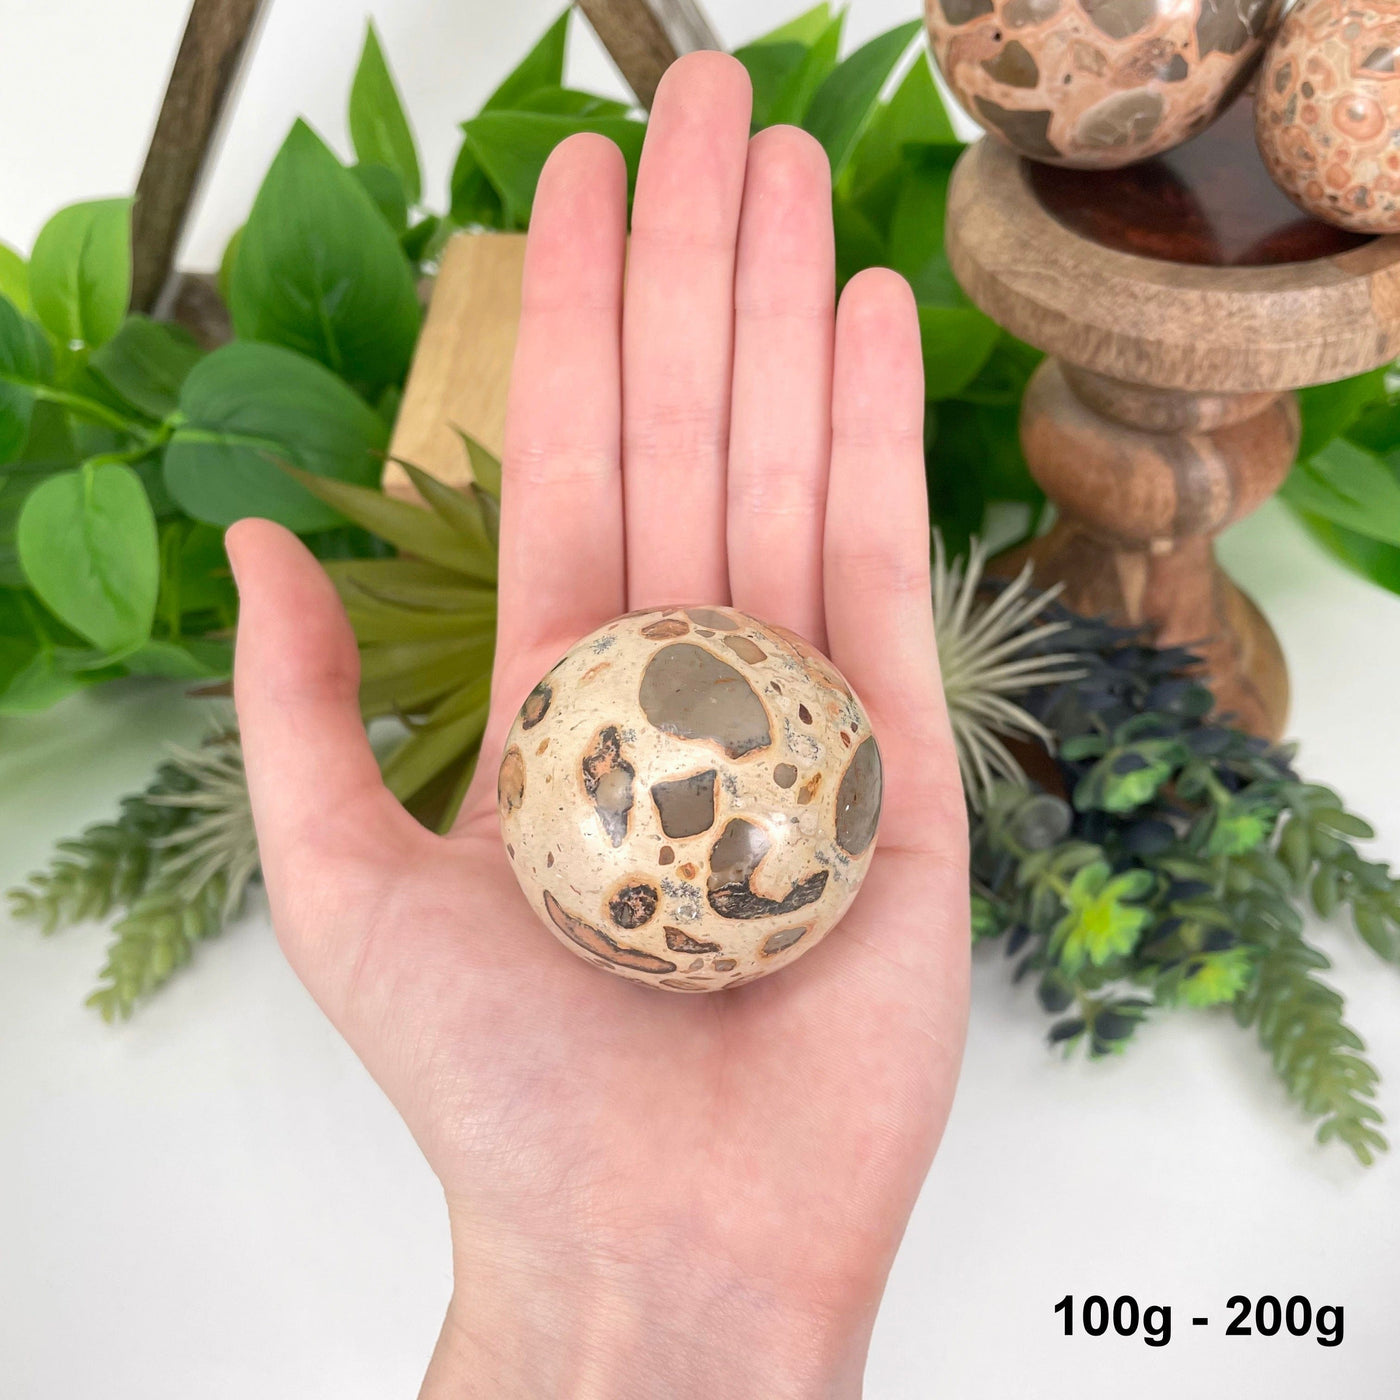 one 100g-200g leopard skin rhyolite sphere in hand in front of backdrop for size reference